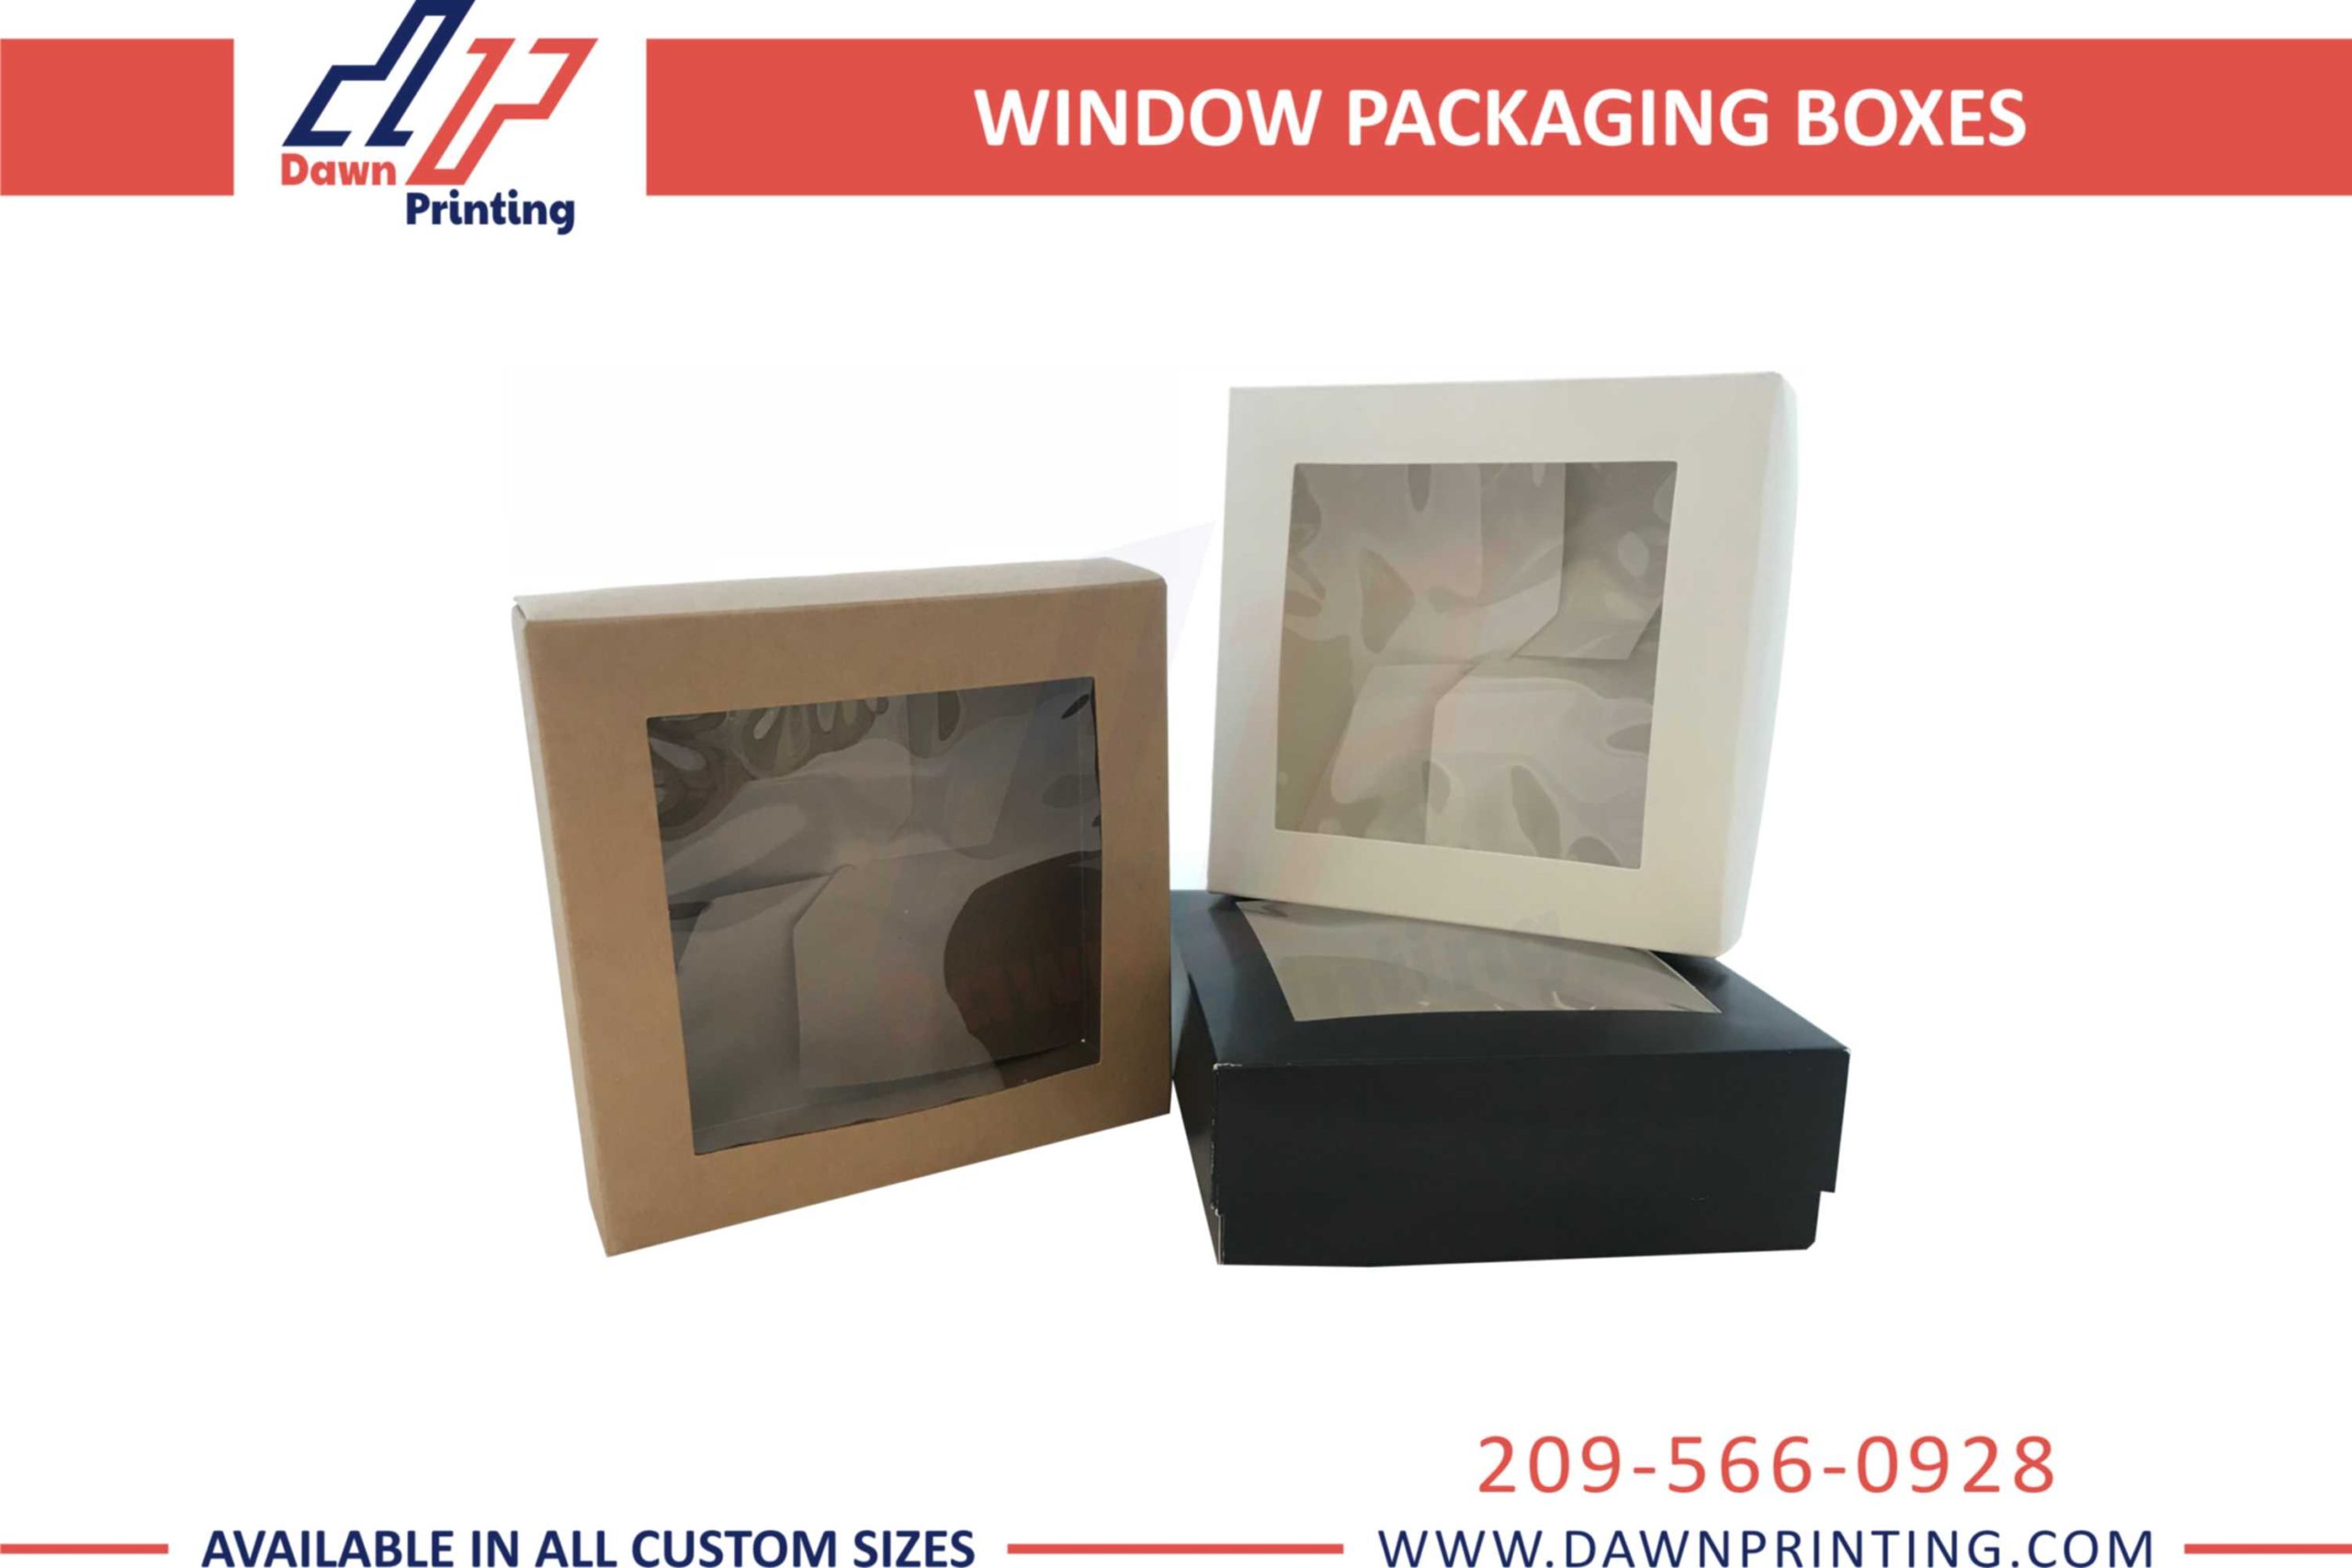 Clear window Packaging Boxes - Dawn Printing